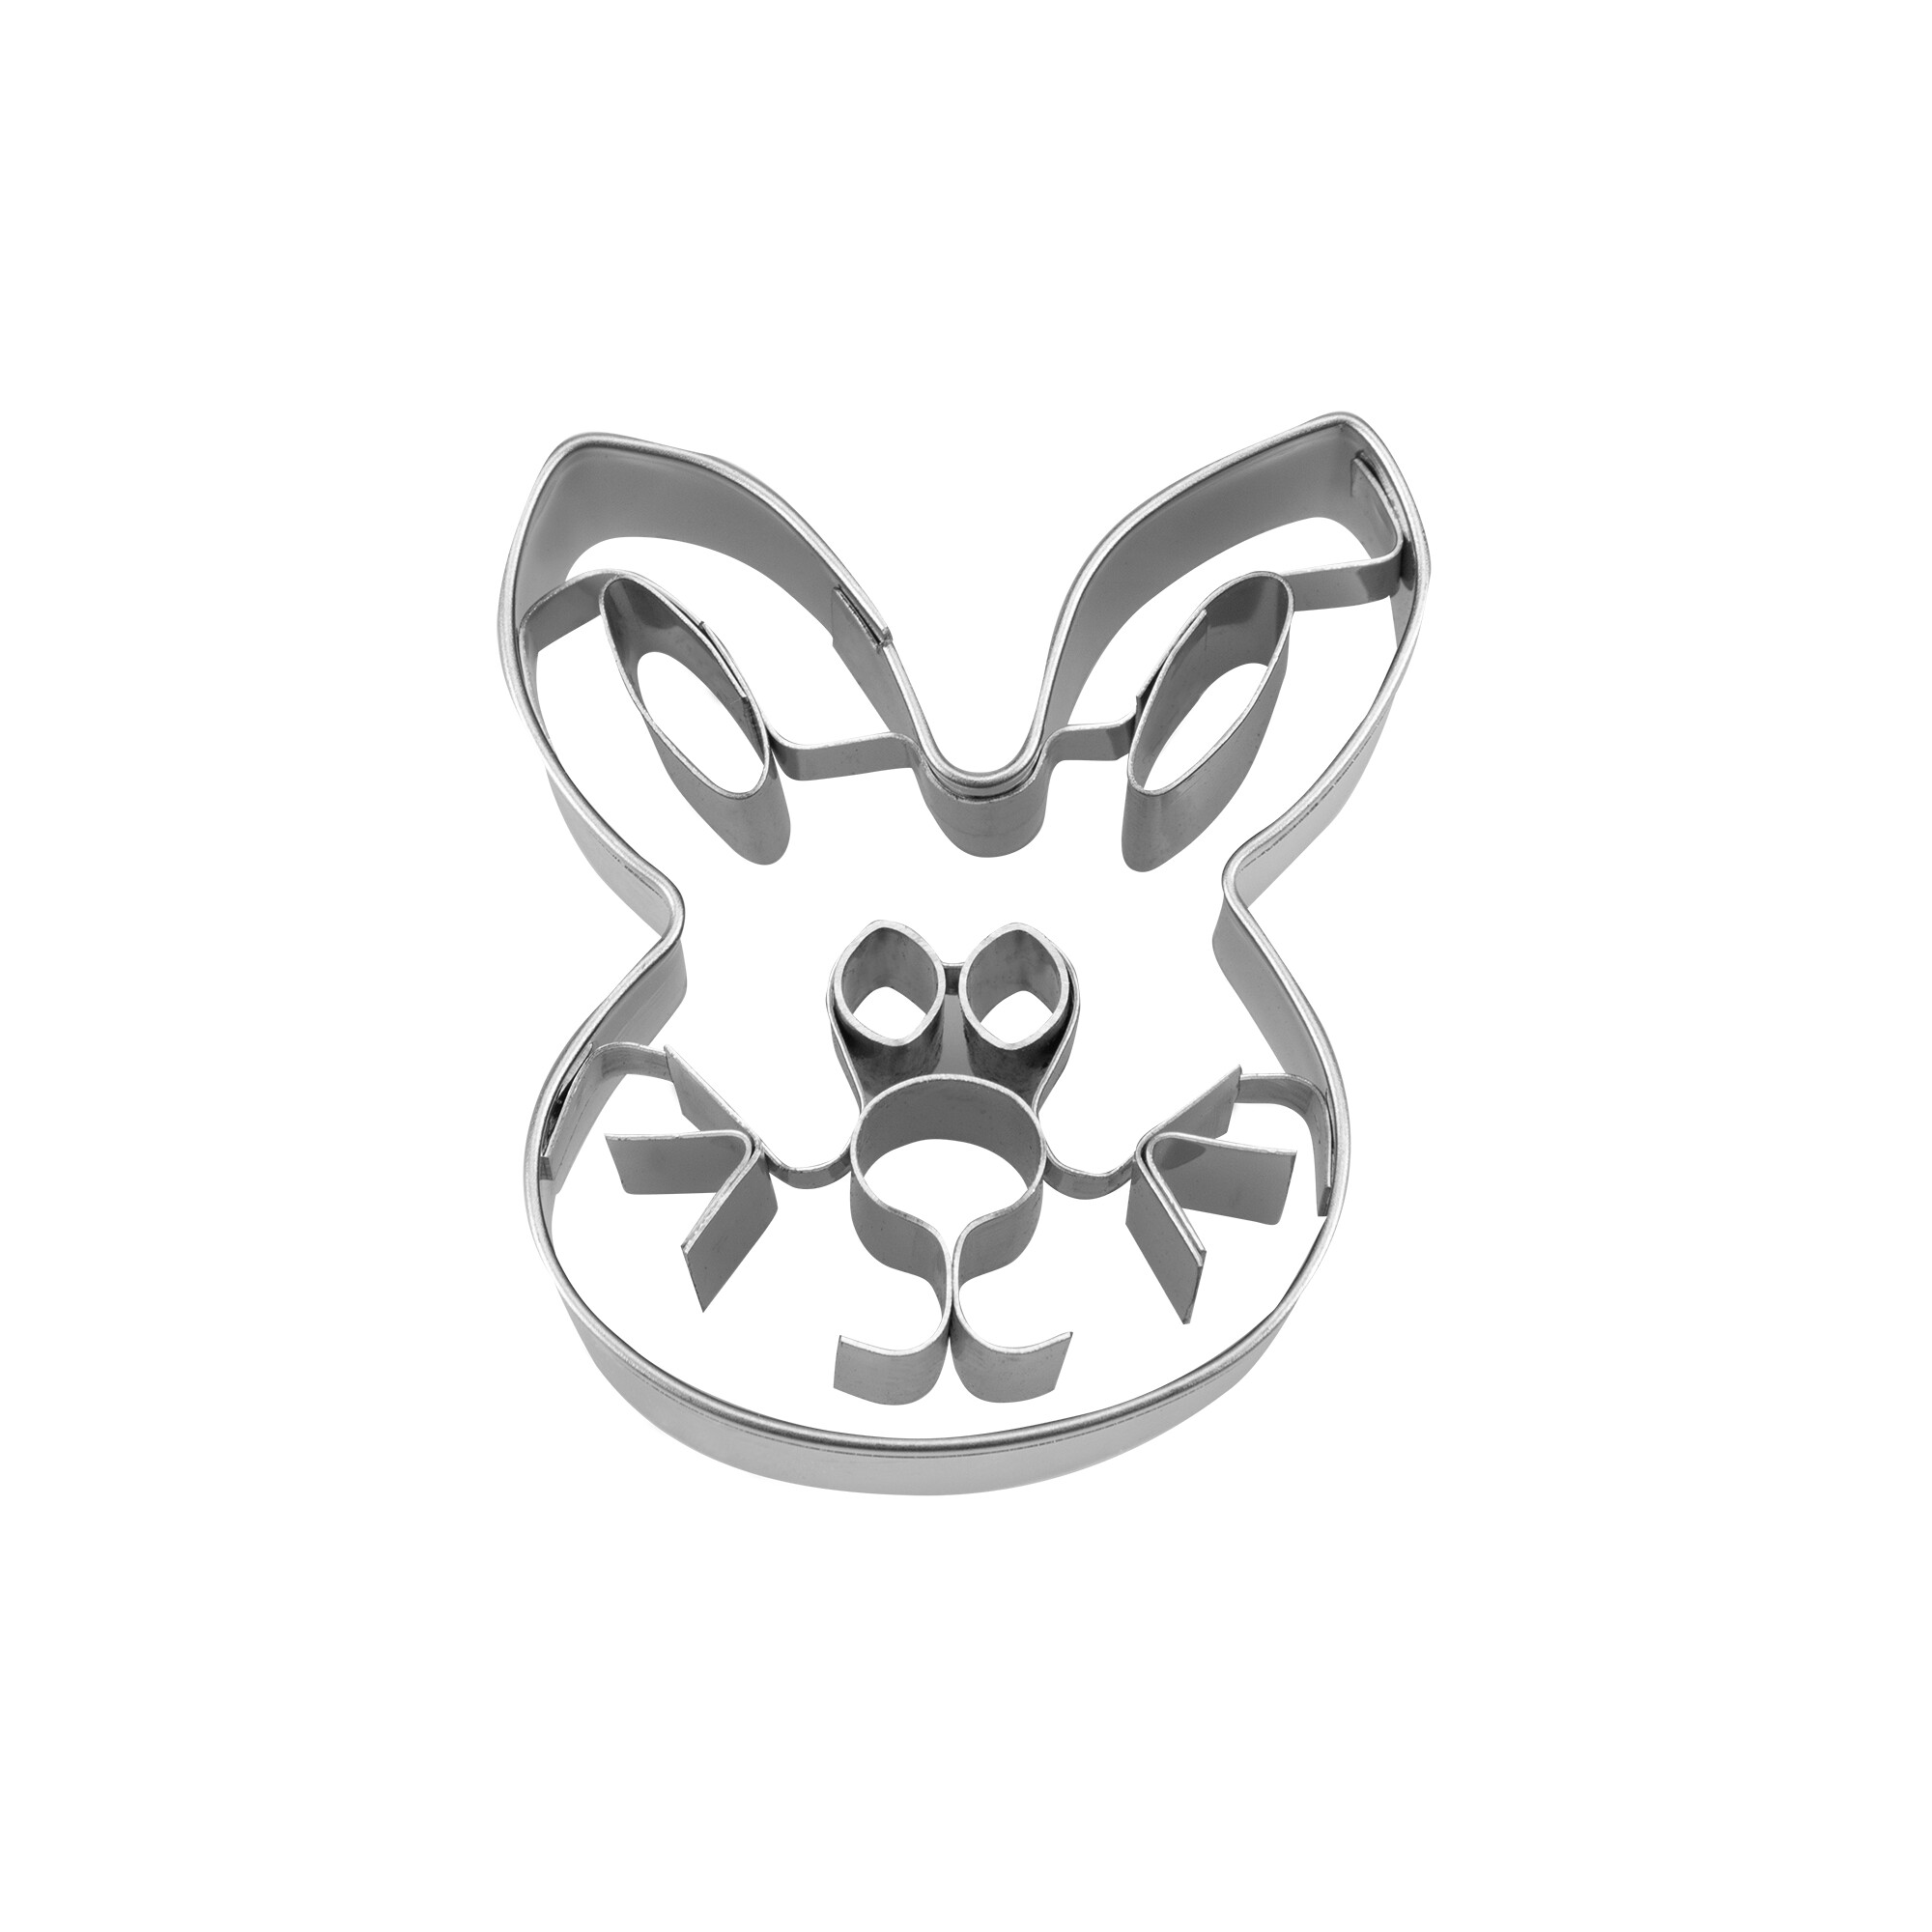 Cookie cutter with stamp – Rabbit face